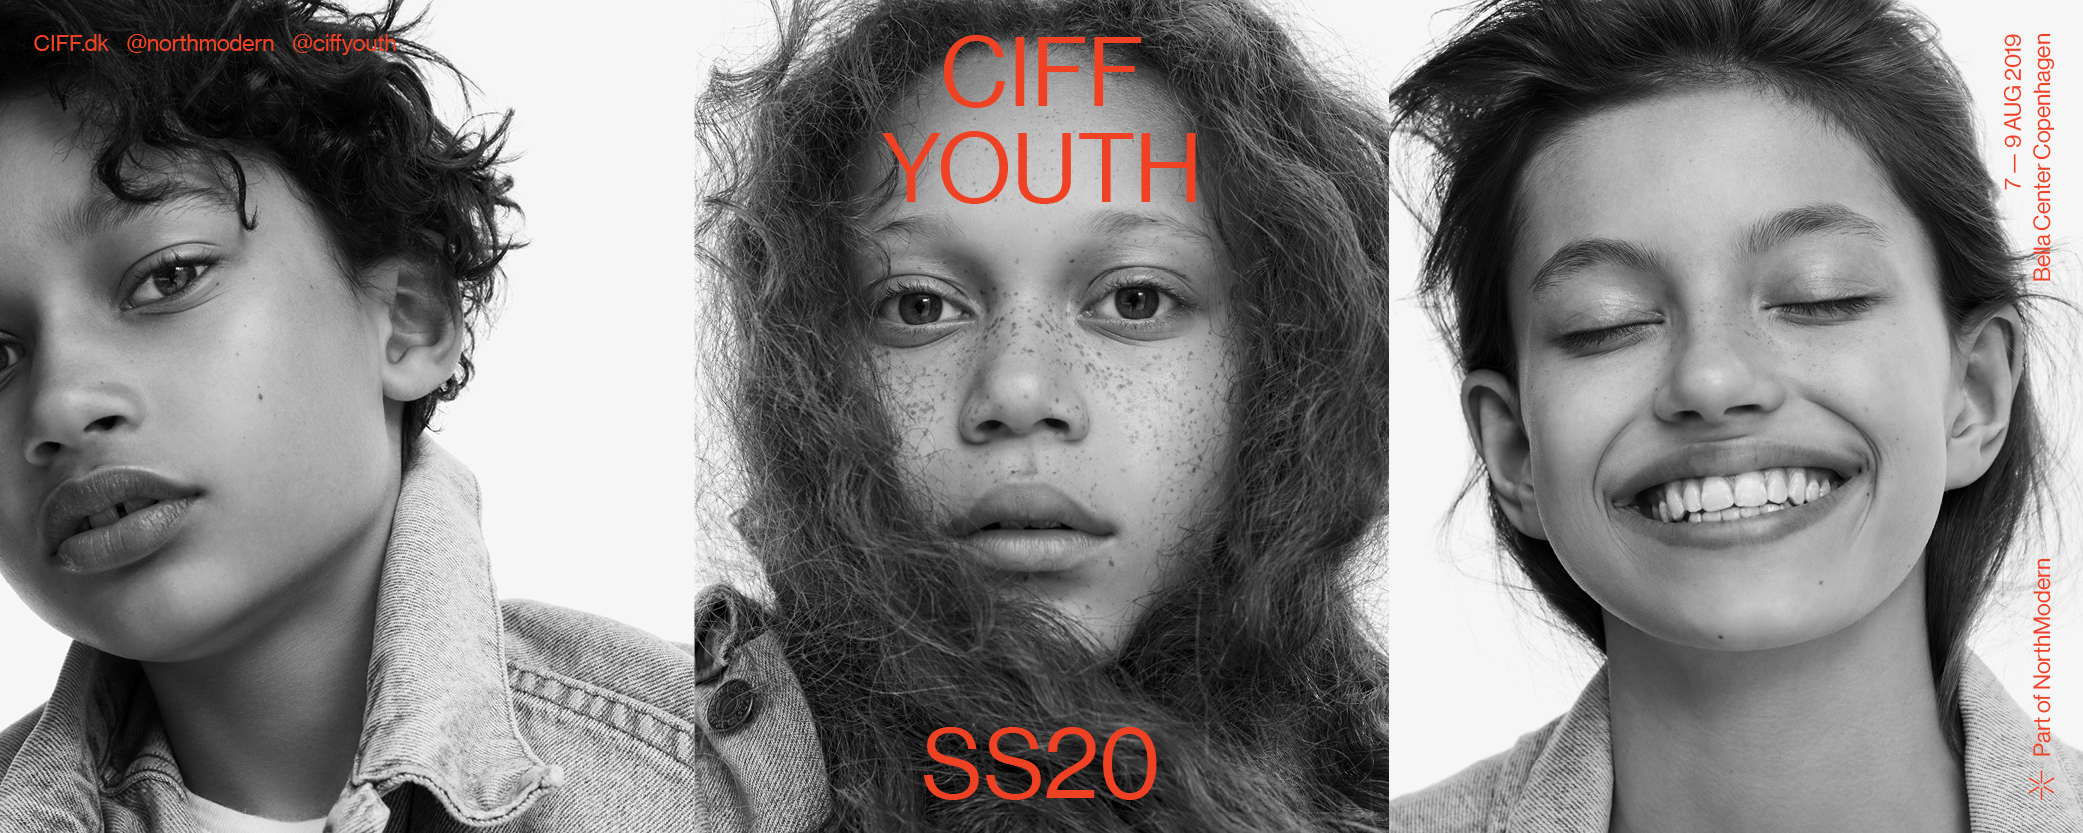 Ciff Youth im August 2019